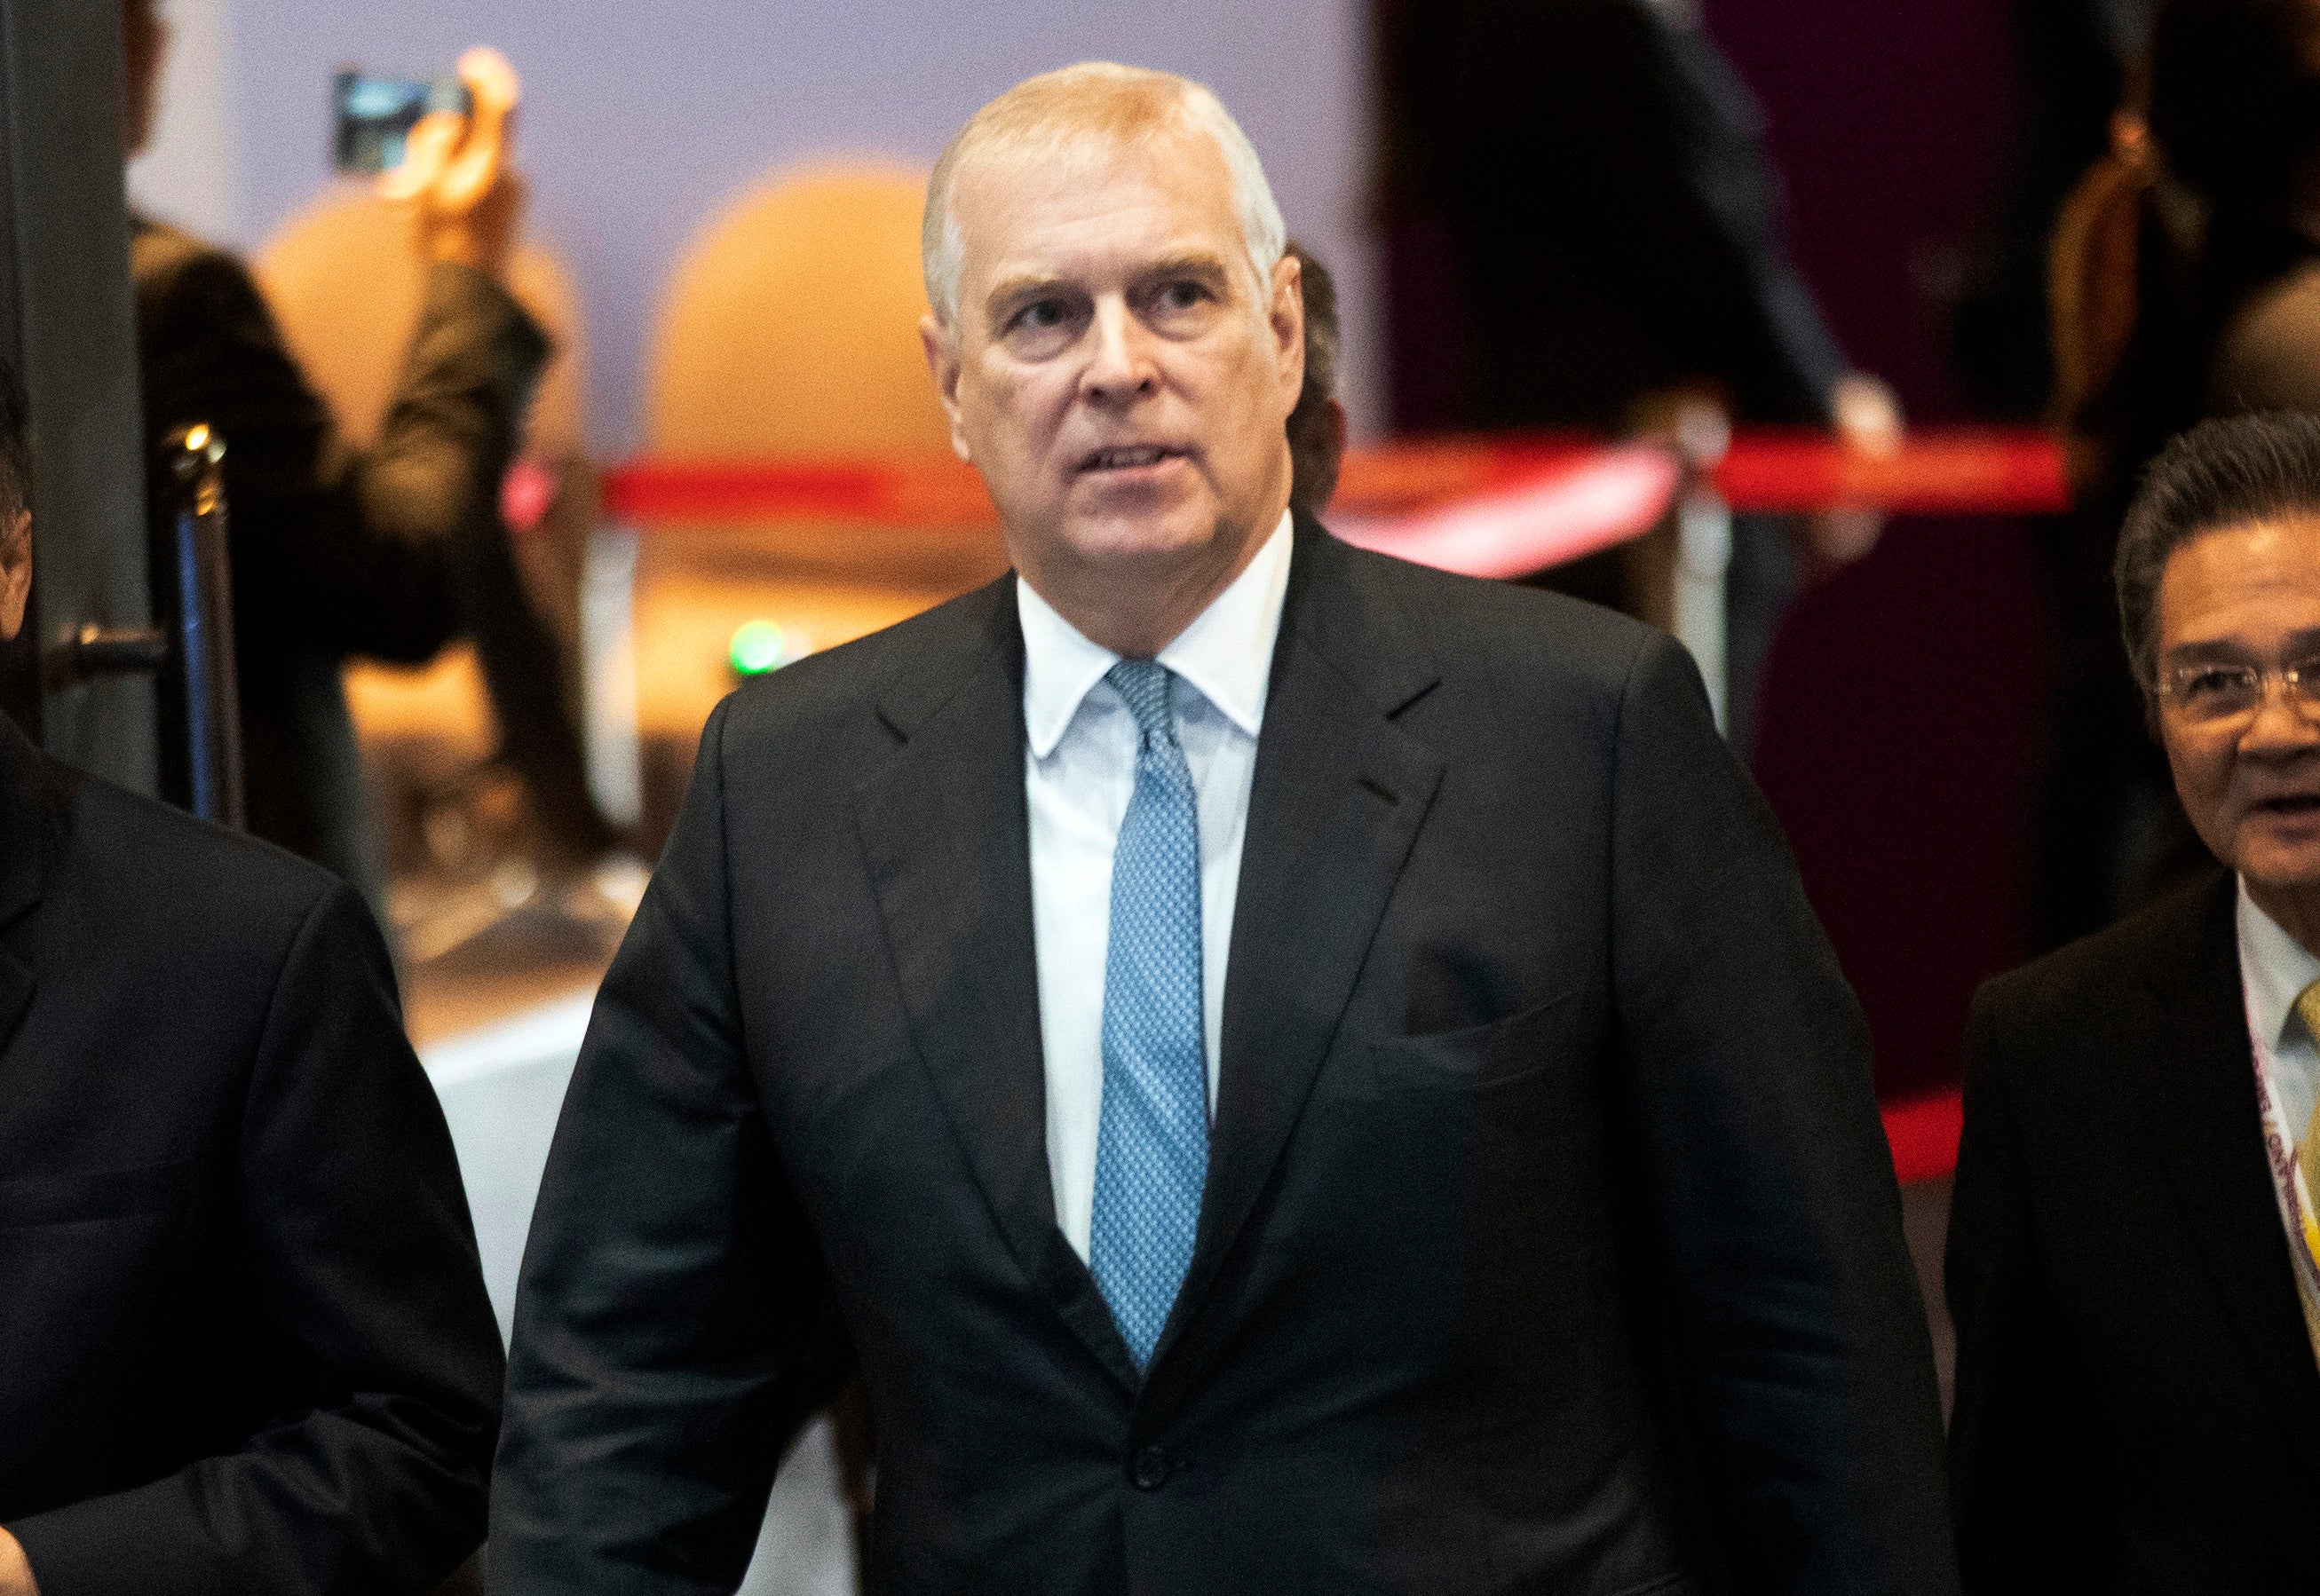 Prince Andrew has denied the allegations against him